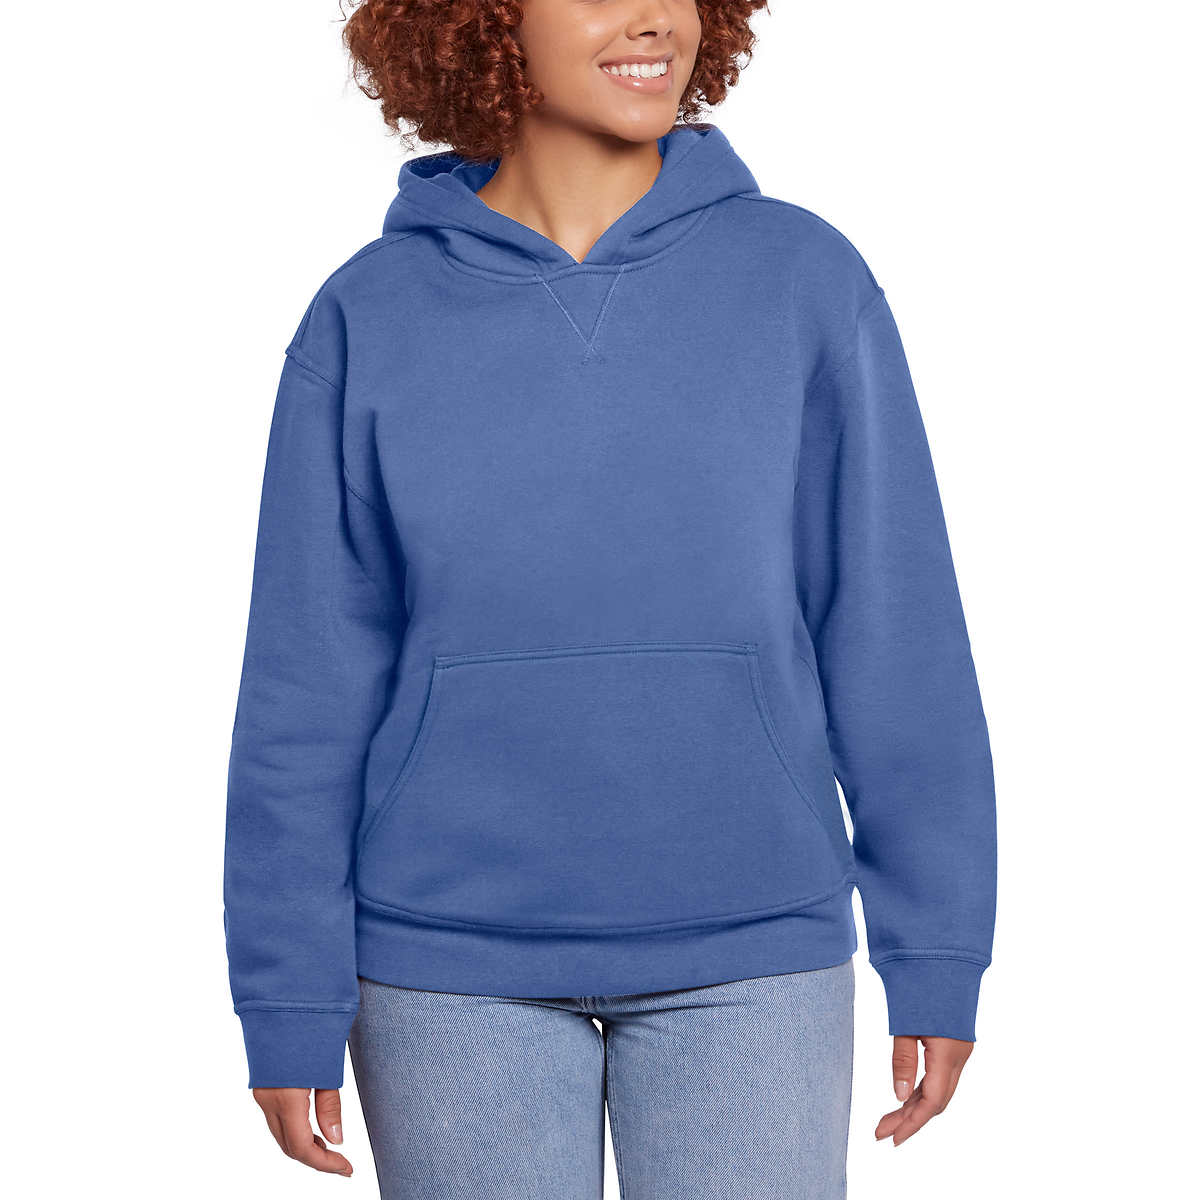 THE GYM PEOPLE Women's Oversized Hoodie Loose fit Soft Fleece